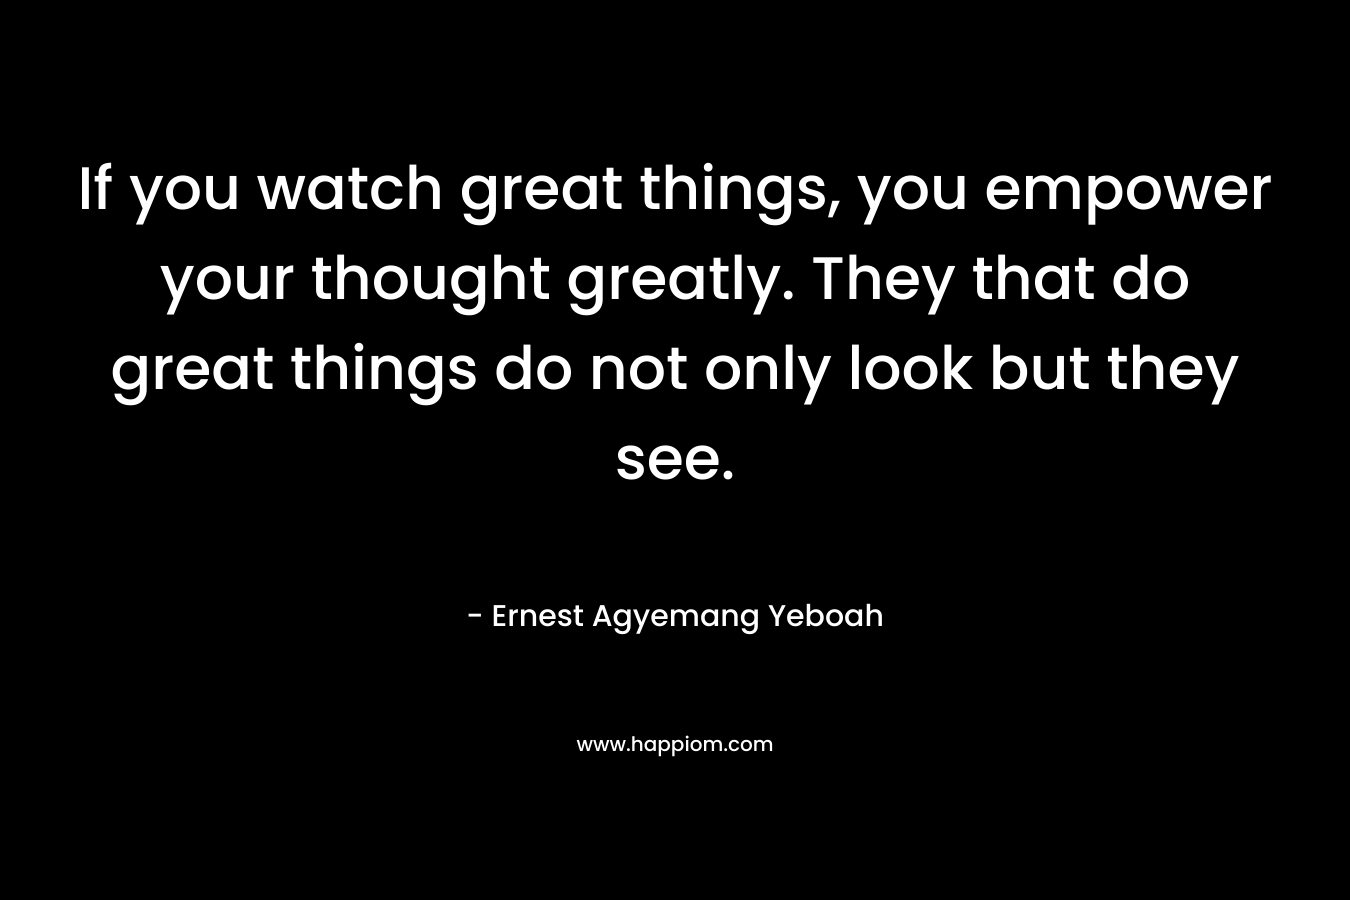 If you watch great things, you empower your thought greatly. They that do great things do not only look but they see.